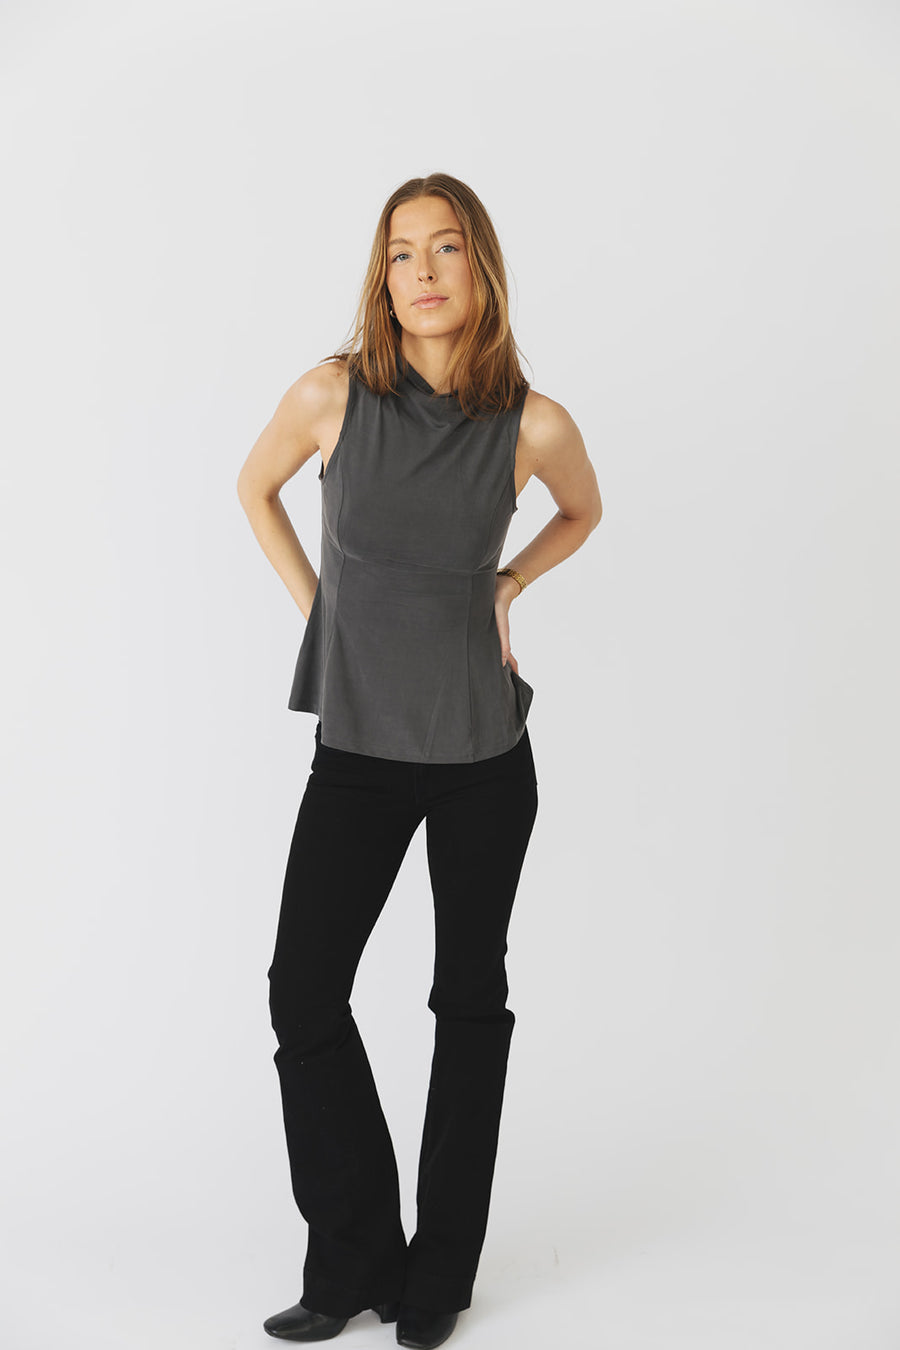 The Meredith Top